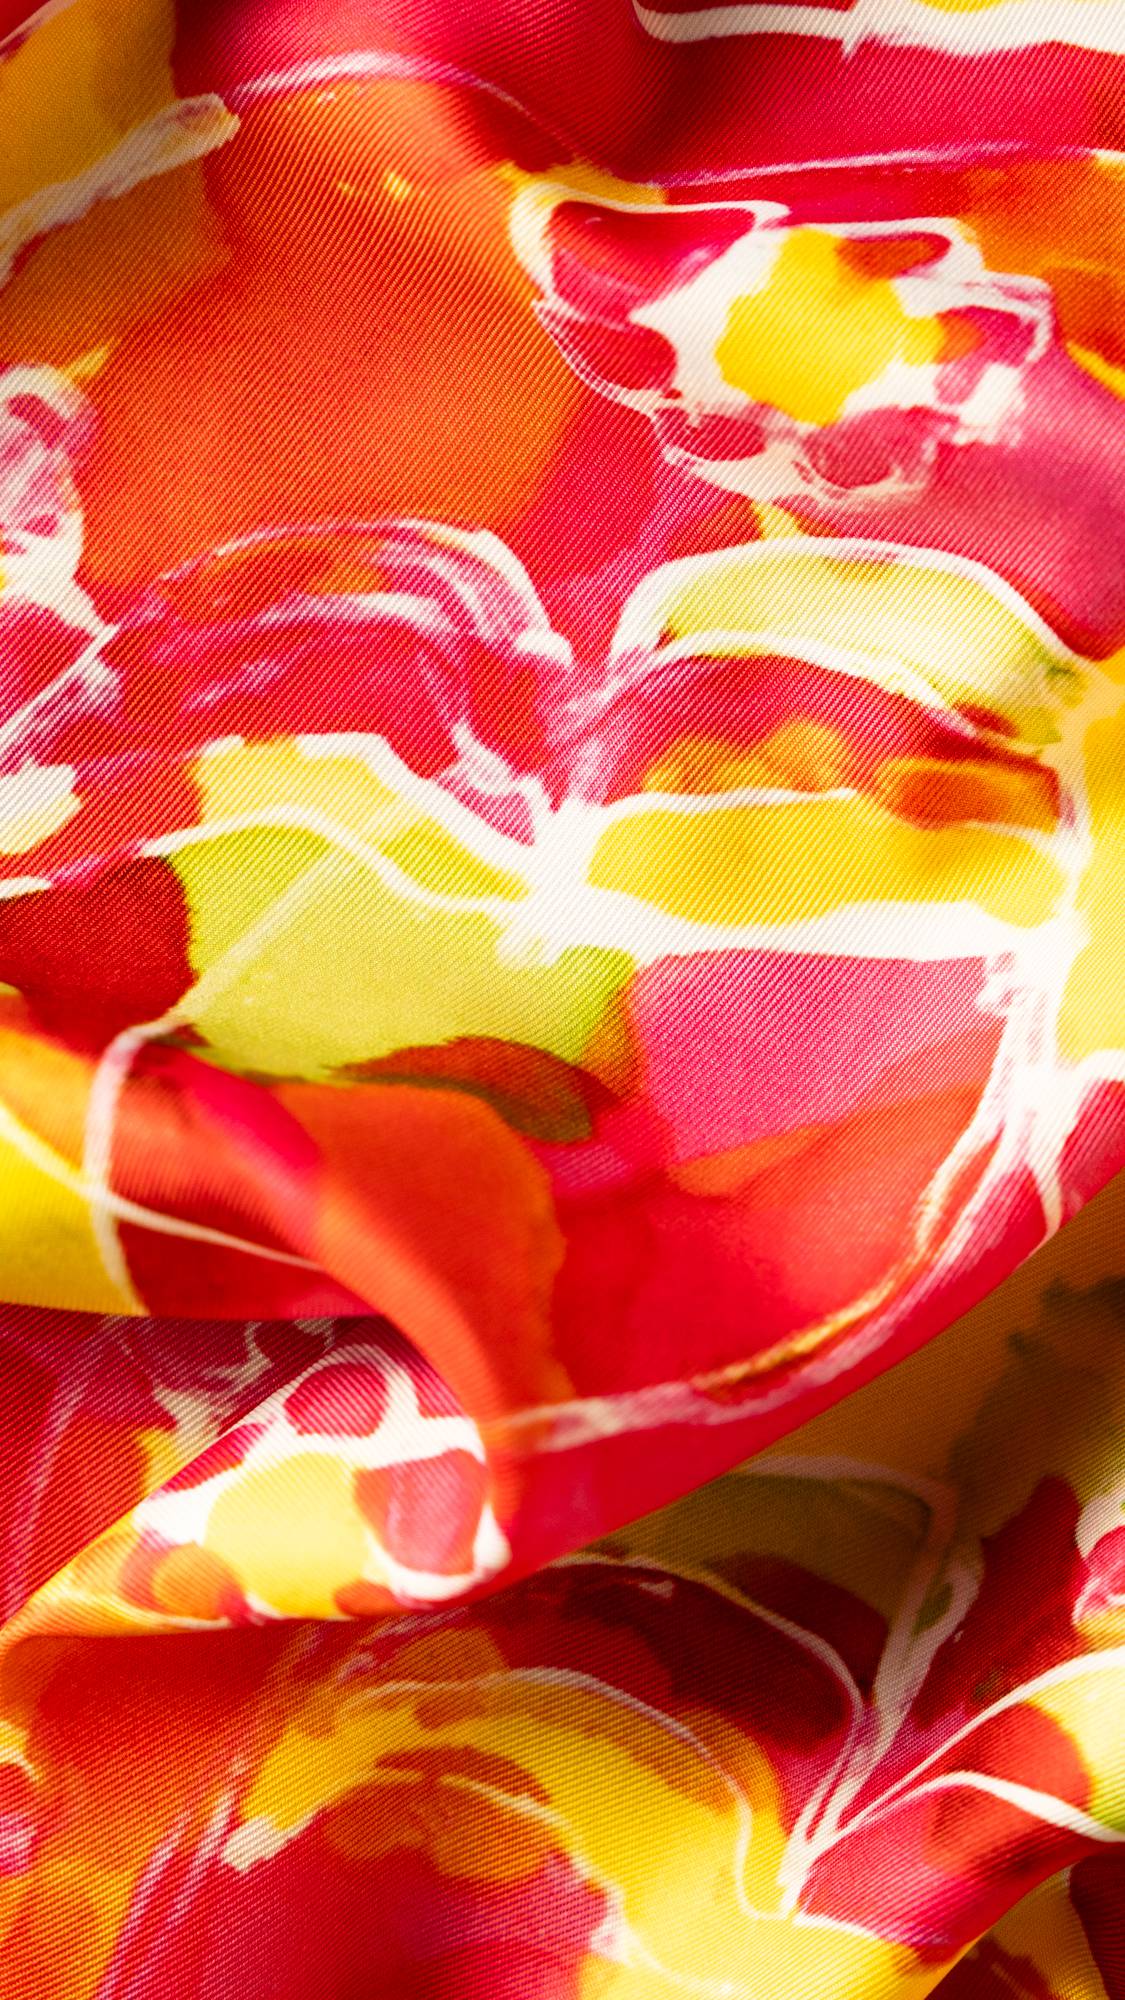 Image shows a super close up of the Hearts and Swirls knot wrap with blends of orange, red and pink with a wispy white heart.